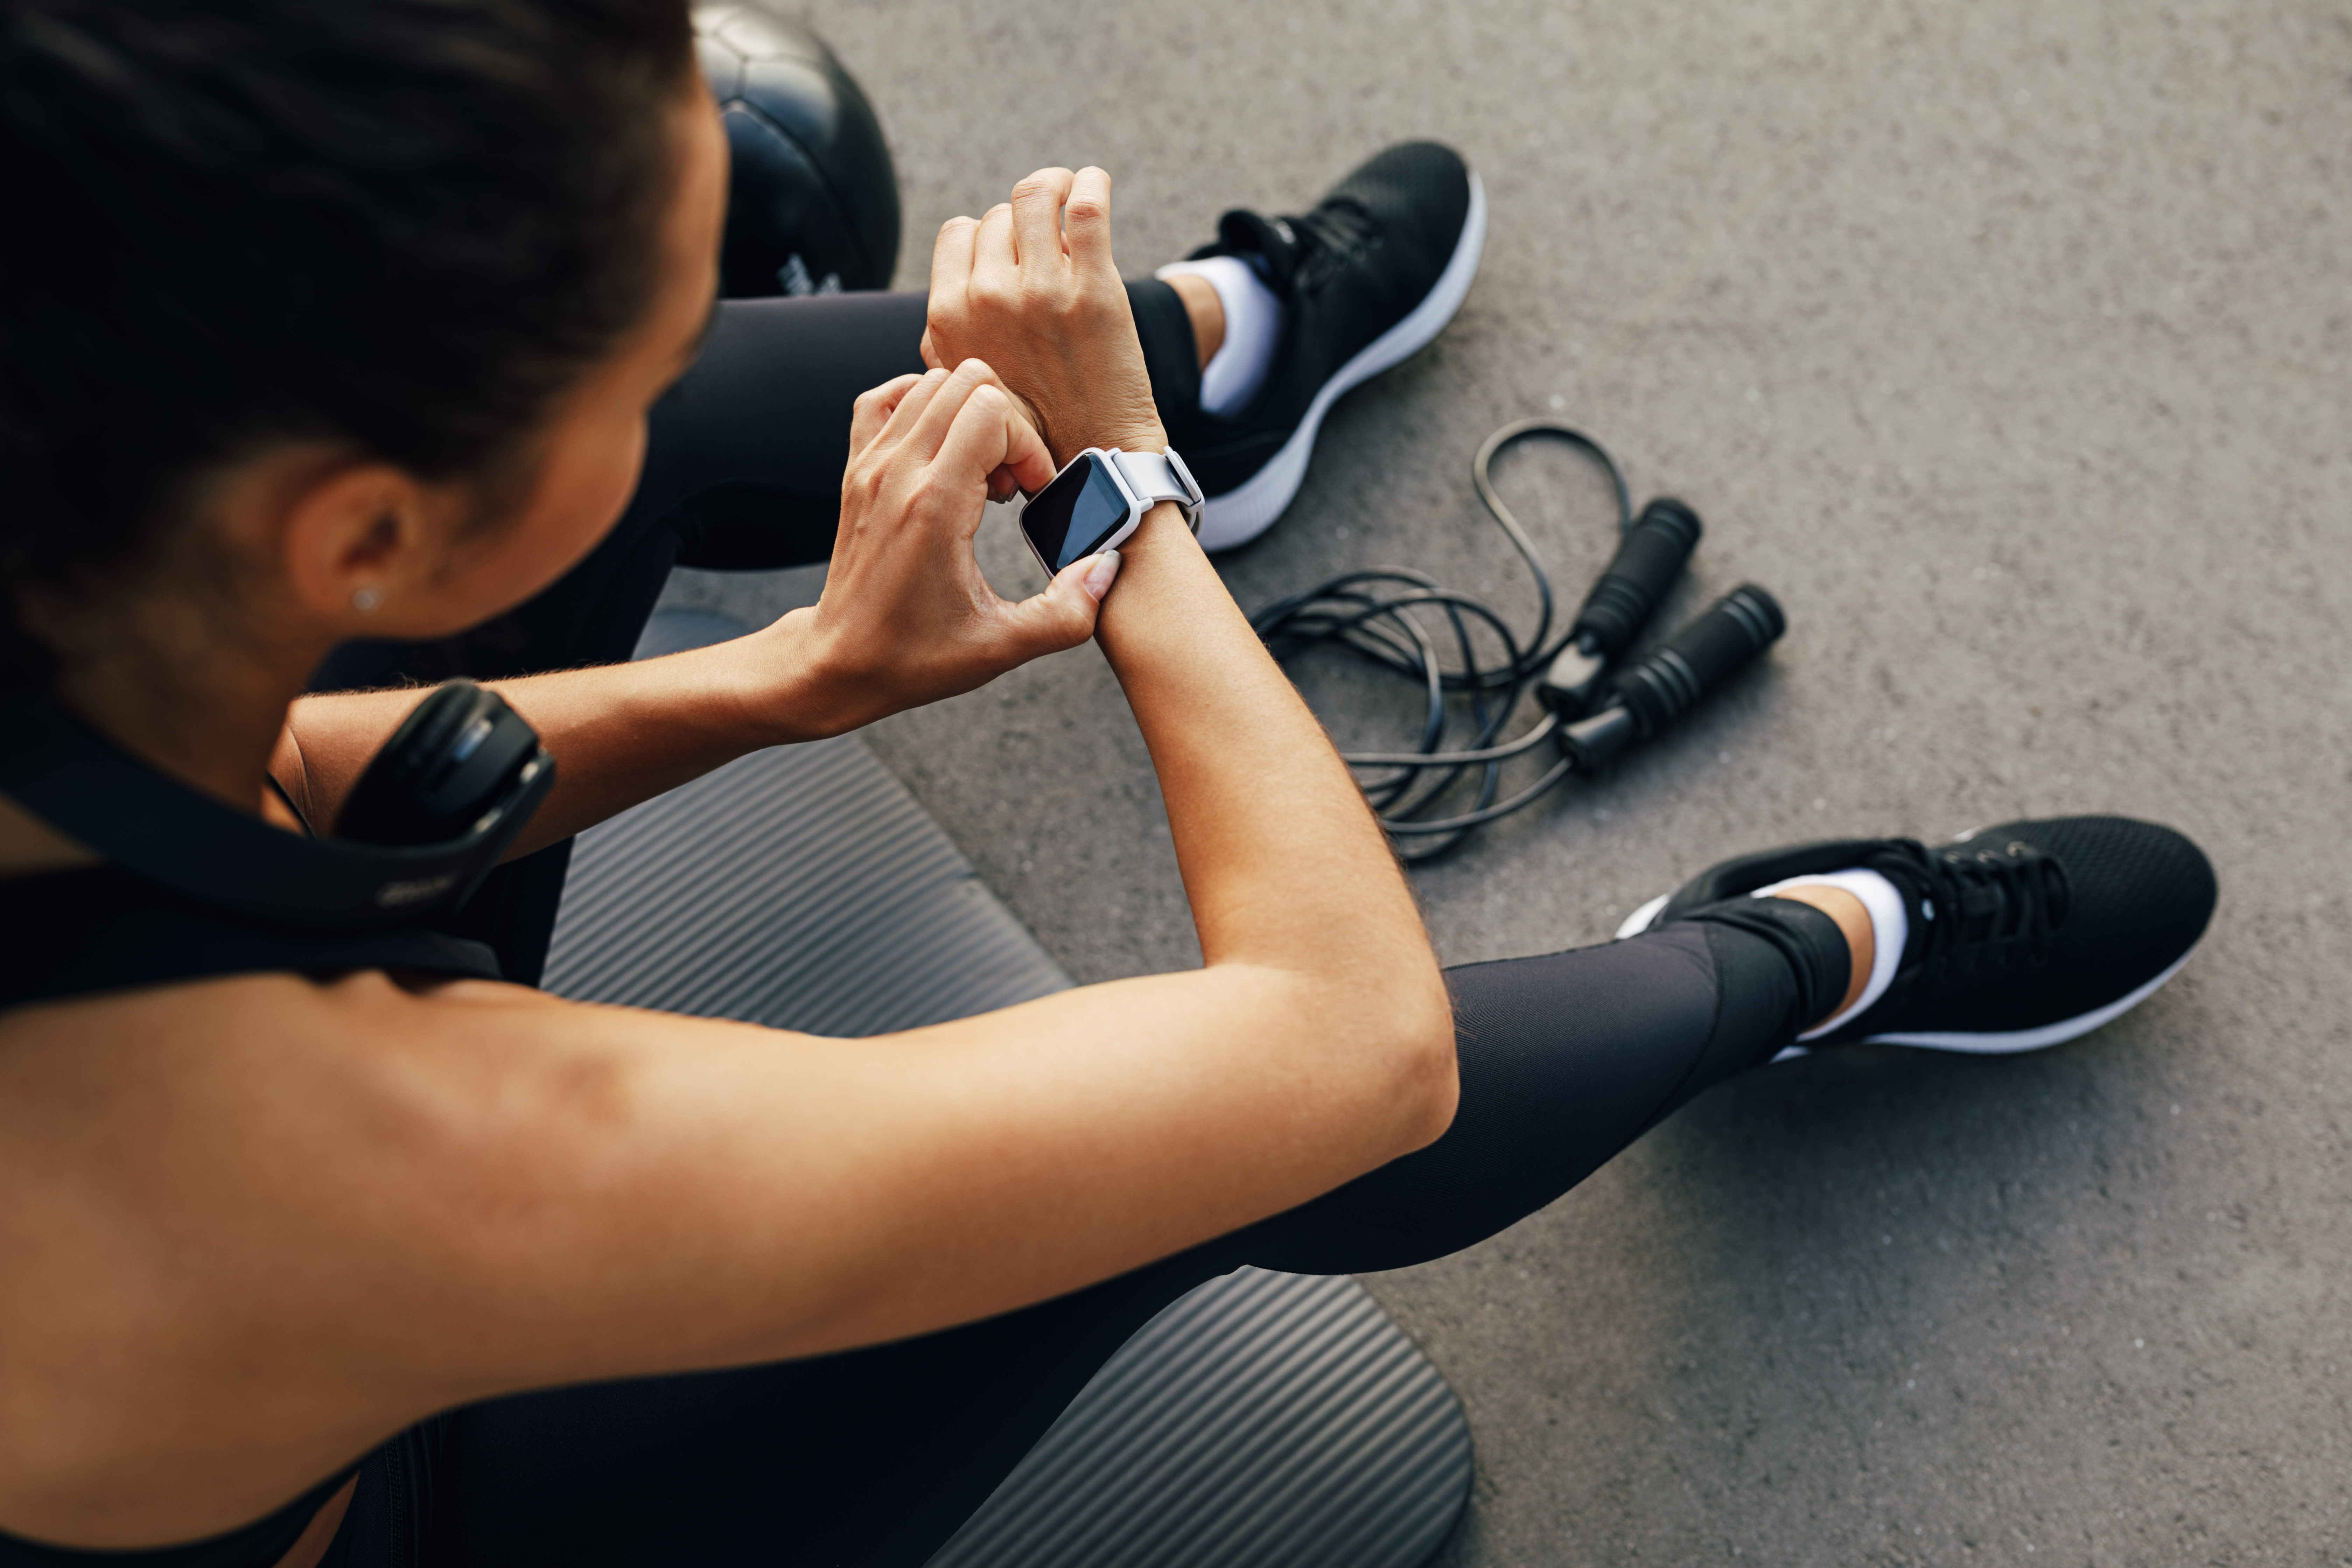 The biggest risk of using fitness trackers to monitor health